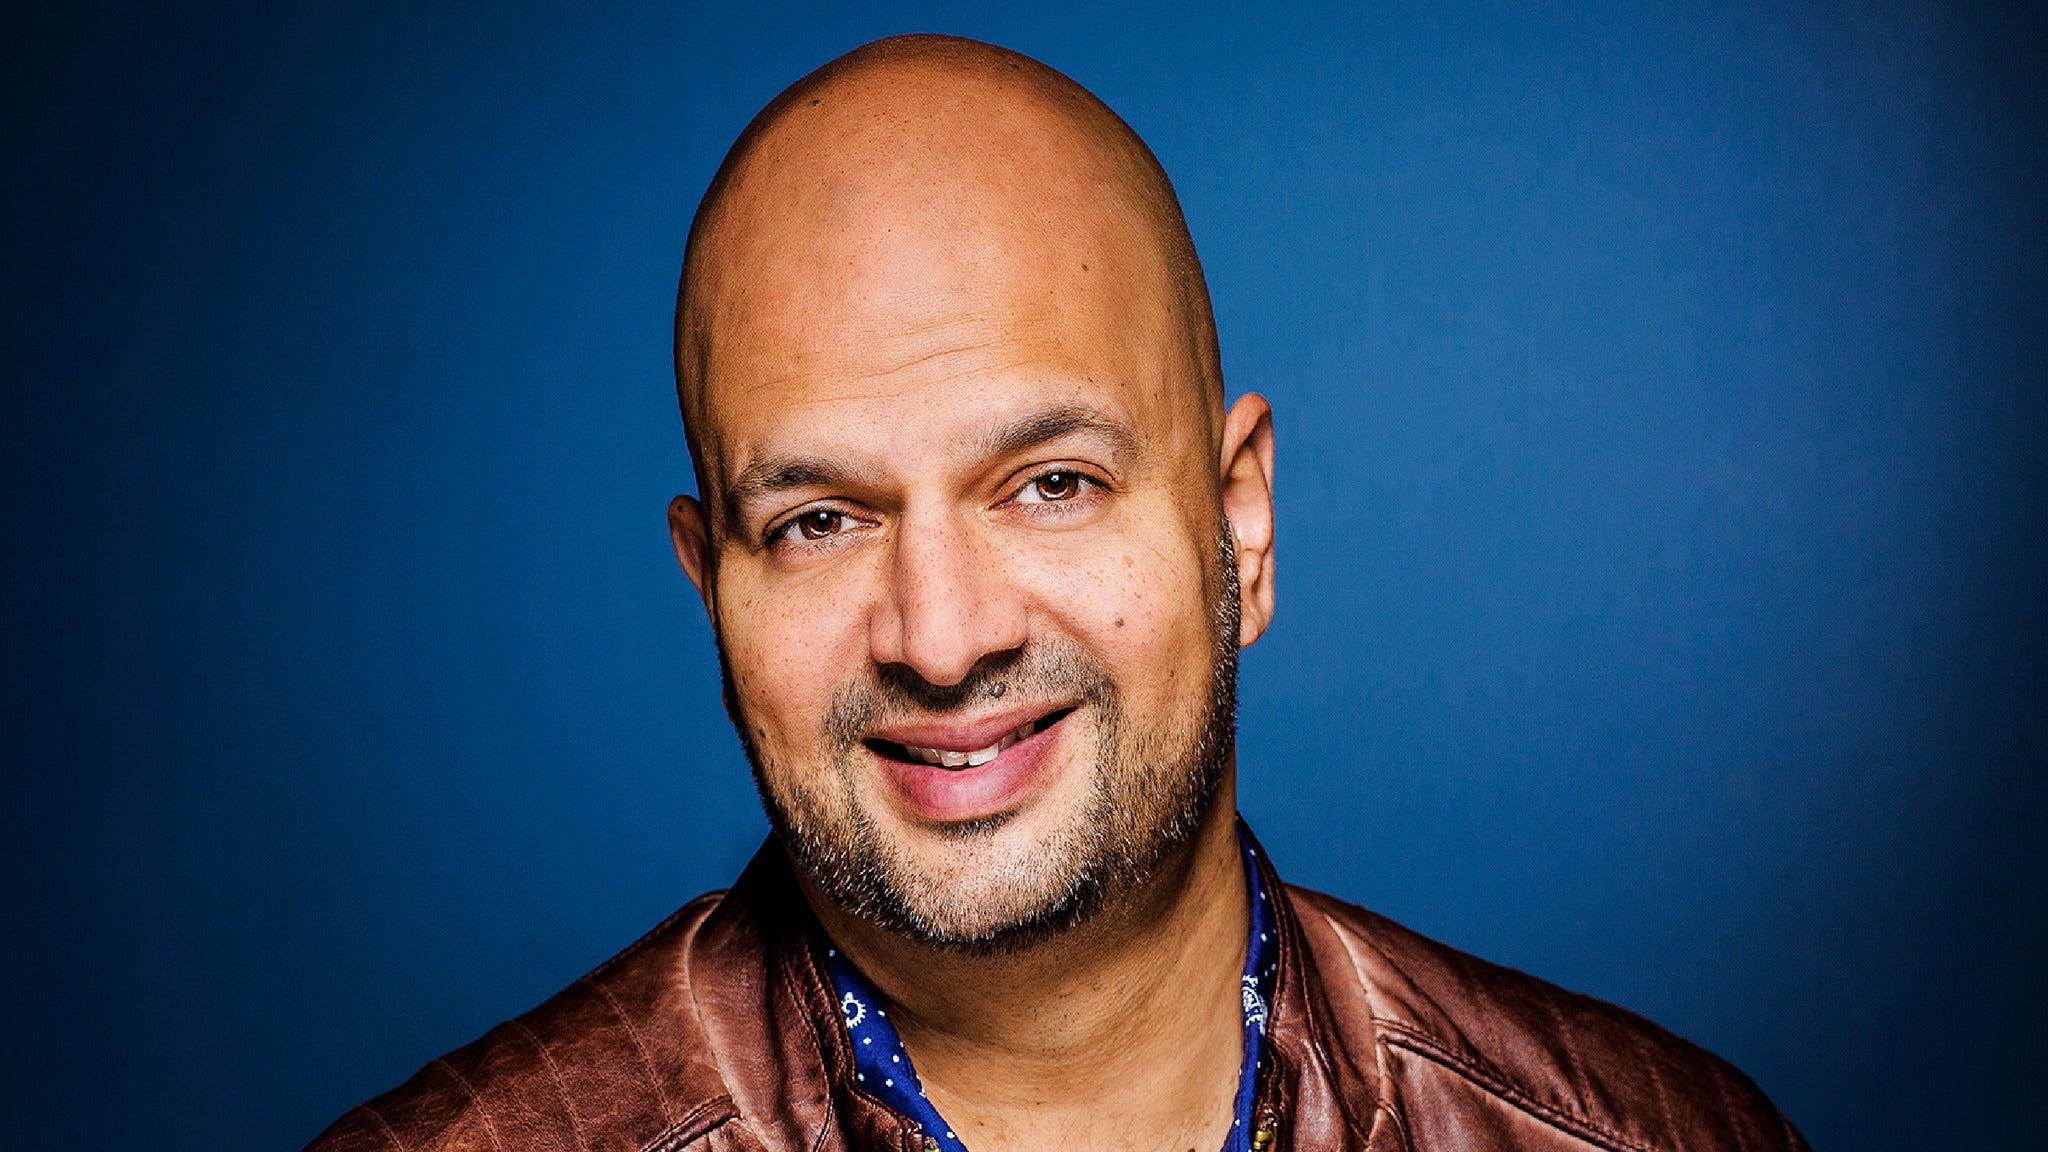 JFL Toronto ComedyCON: Ali Hassan - Book Signing pre-sale password for performance tickets in Toronto, ON (O'Keefe Lounge at Meridian Hall)